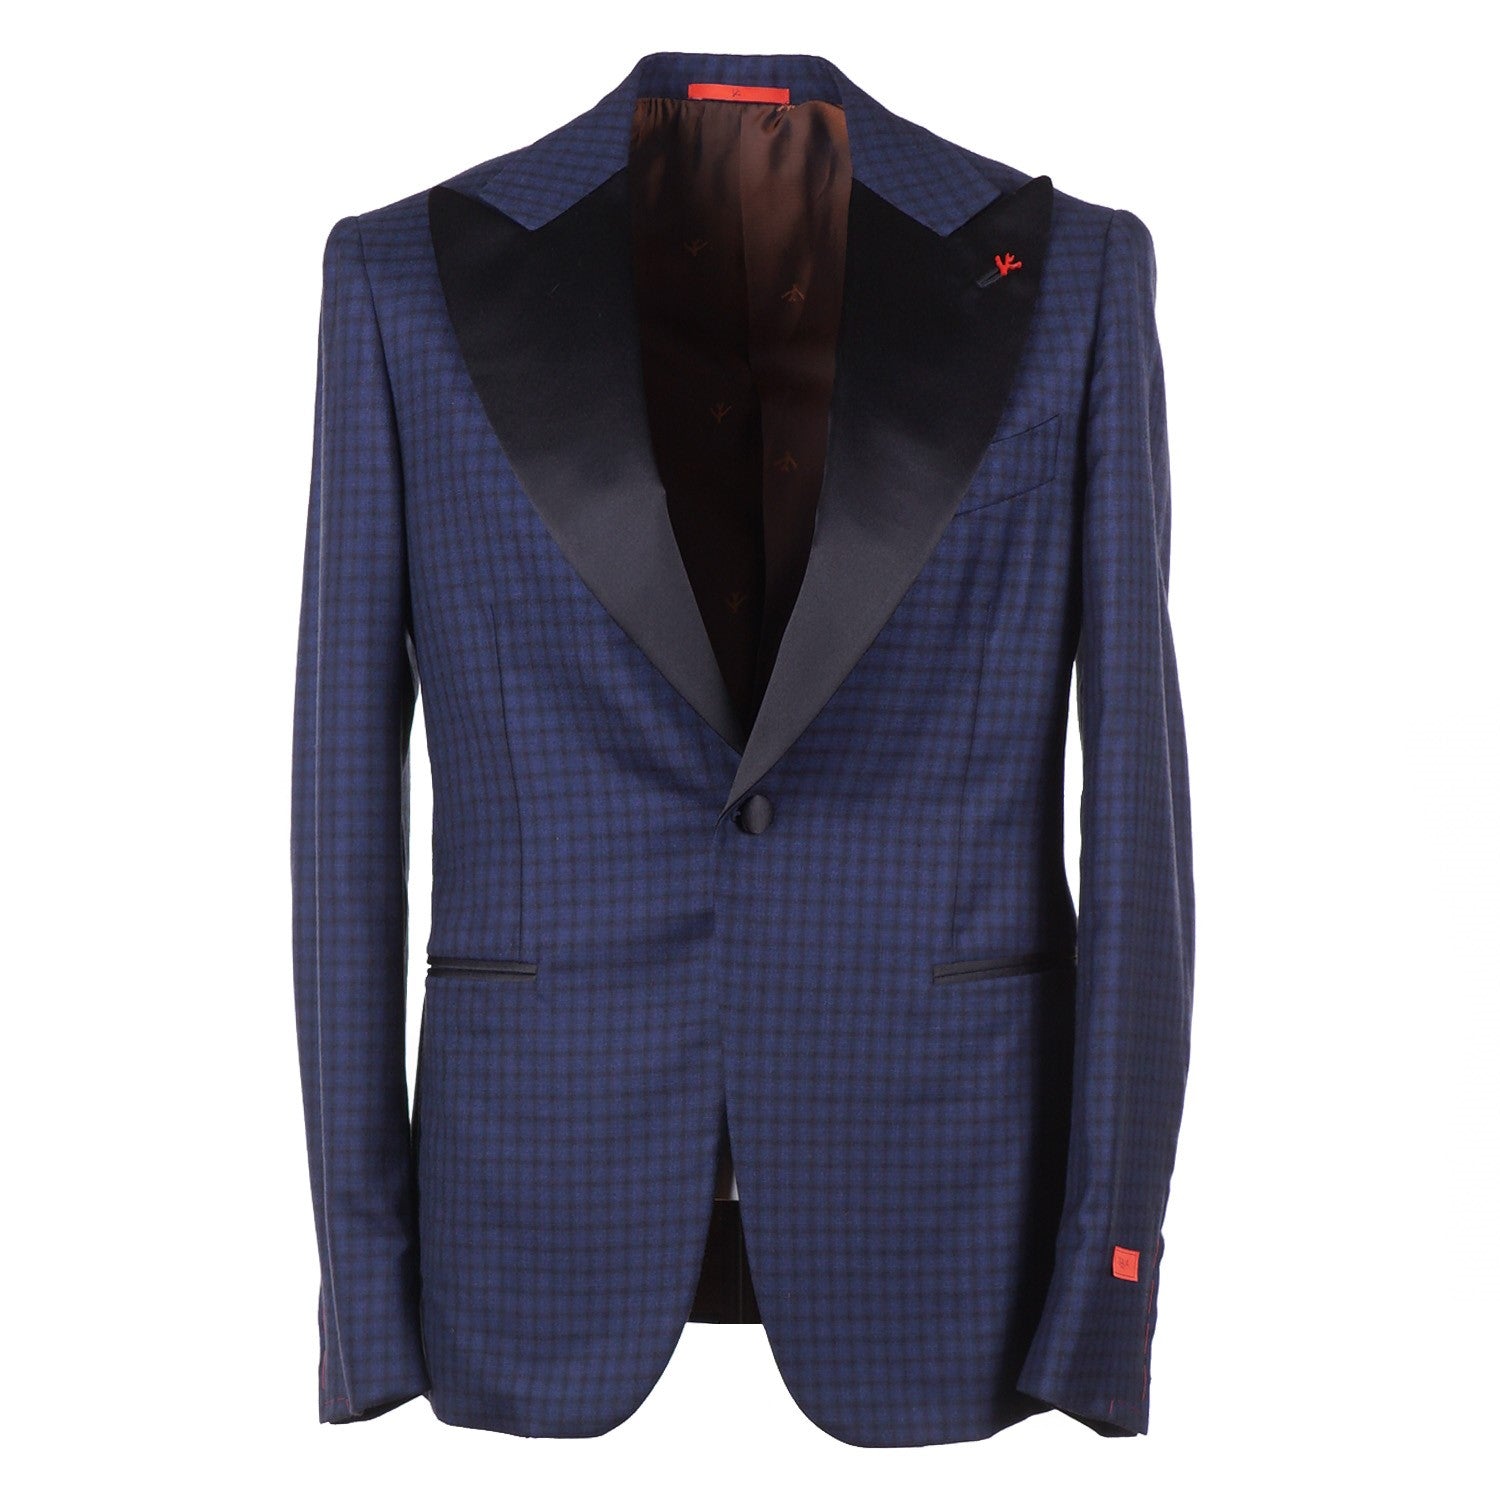 Isaia Slim-Fit Cashmere and Silk Dinner Jacket - Top Shelf Apparel